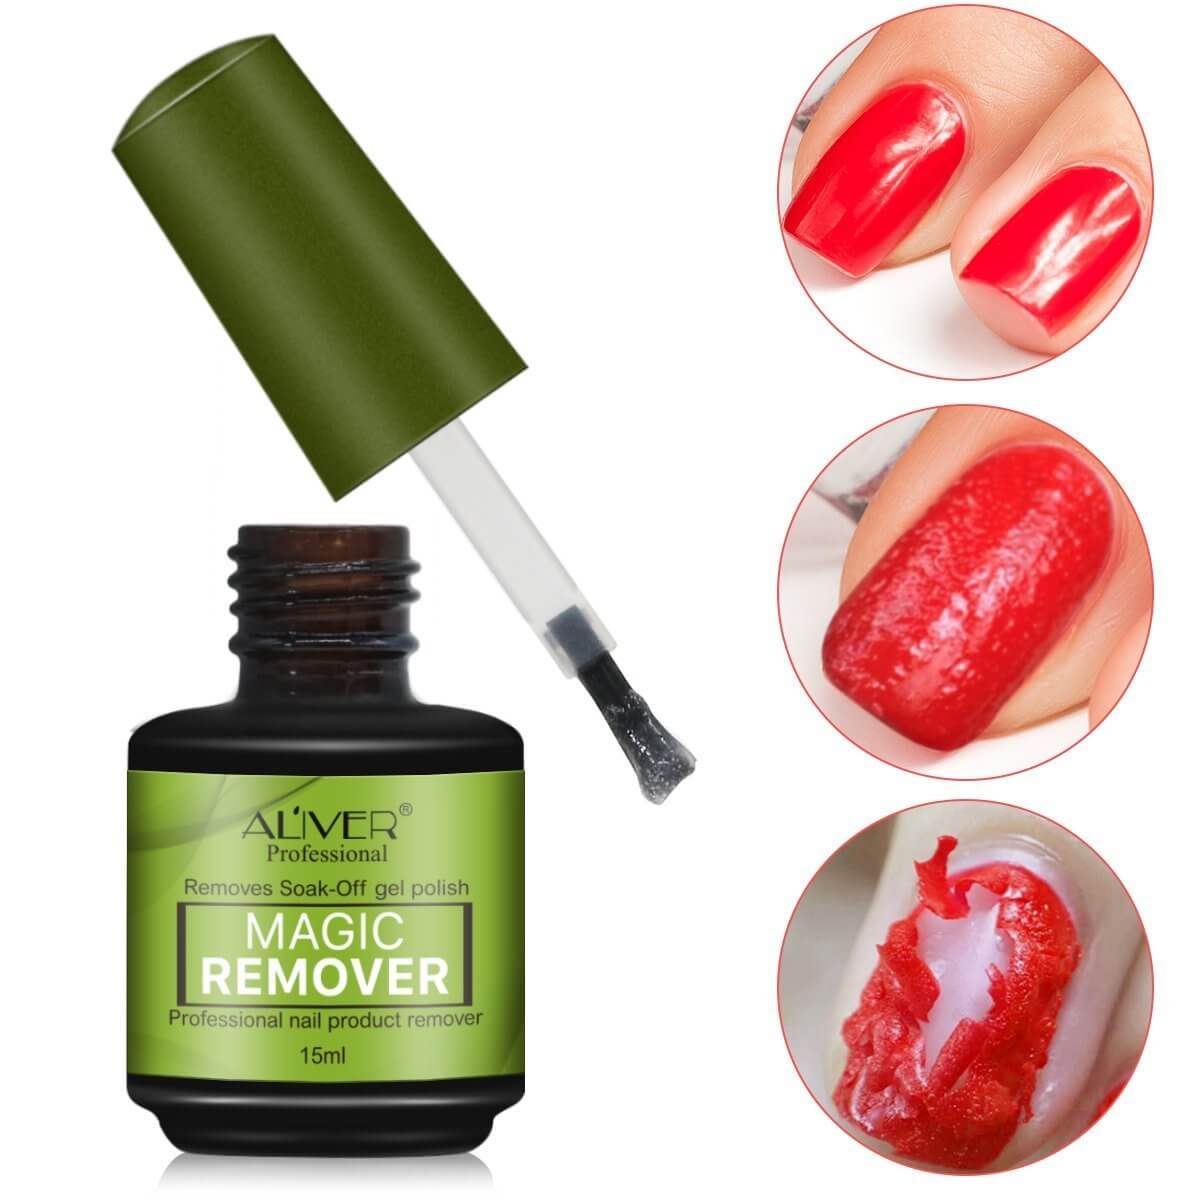 Aliver Nail Polish Remover Quick Professional for Natural, Gel, Acrylic,  Sculptured Nails